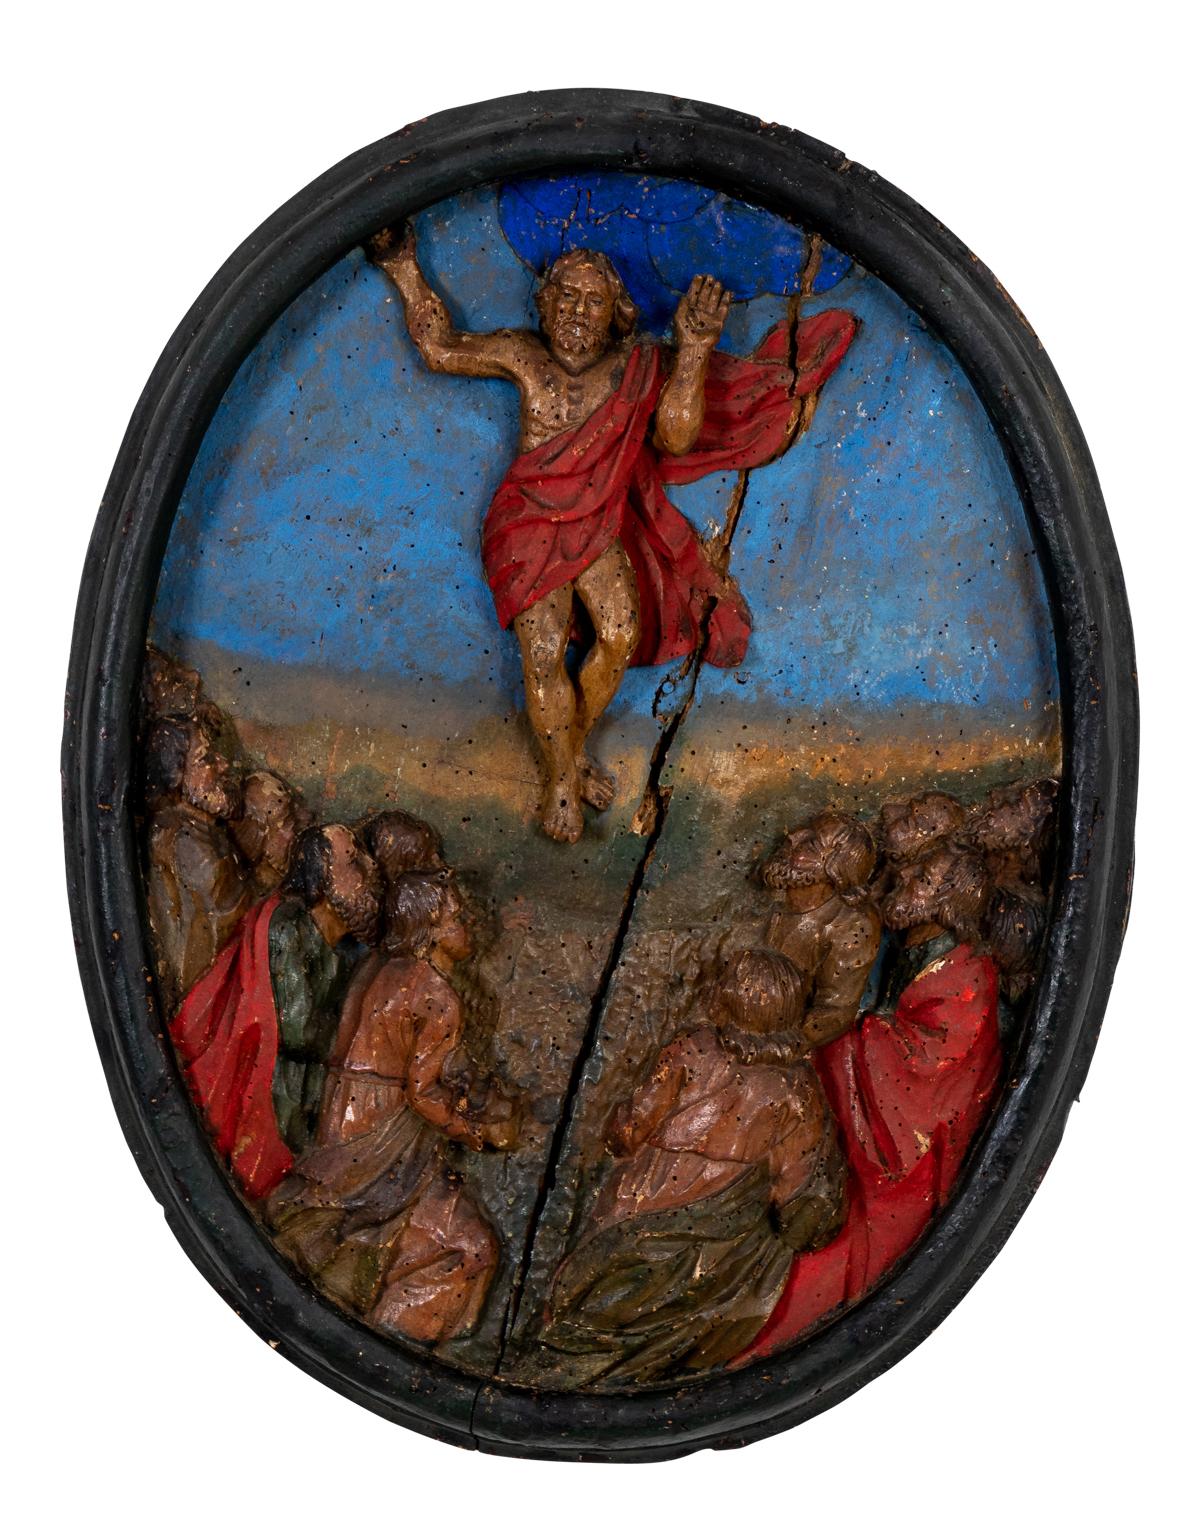 Circa 17th century pair of Italian Baroque style carved and painted walnut plaques depicting Christ preaching and post Resurrection. Made in Italy. Please note of wear consistent with age including minor damage, cracks and in painting. The piece is